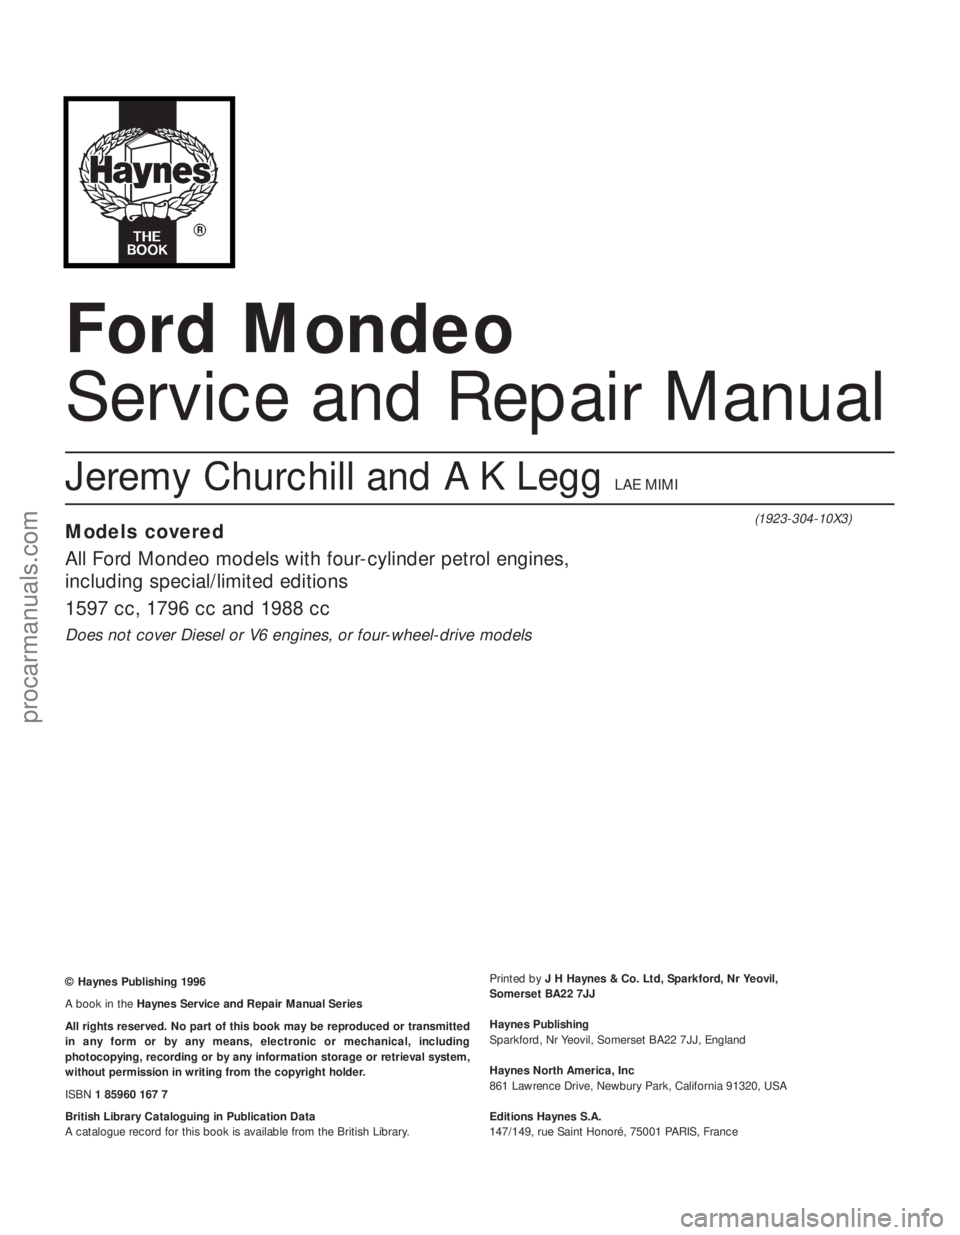 FORD MONDEO 1993  Service Repair Manual Ford Mondeo
Service and Repair Manual
Jeremy Churchill and A K Legg LAE MIMI 
Models covered
All Ford Mondeo models with four-cylinder petrol engines,
including special/limited editions
1597 cc, 1796 